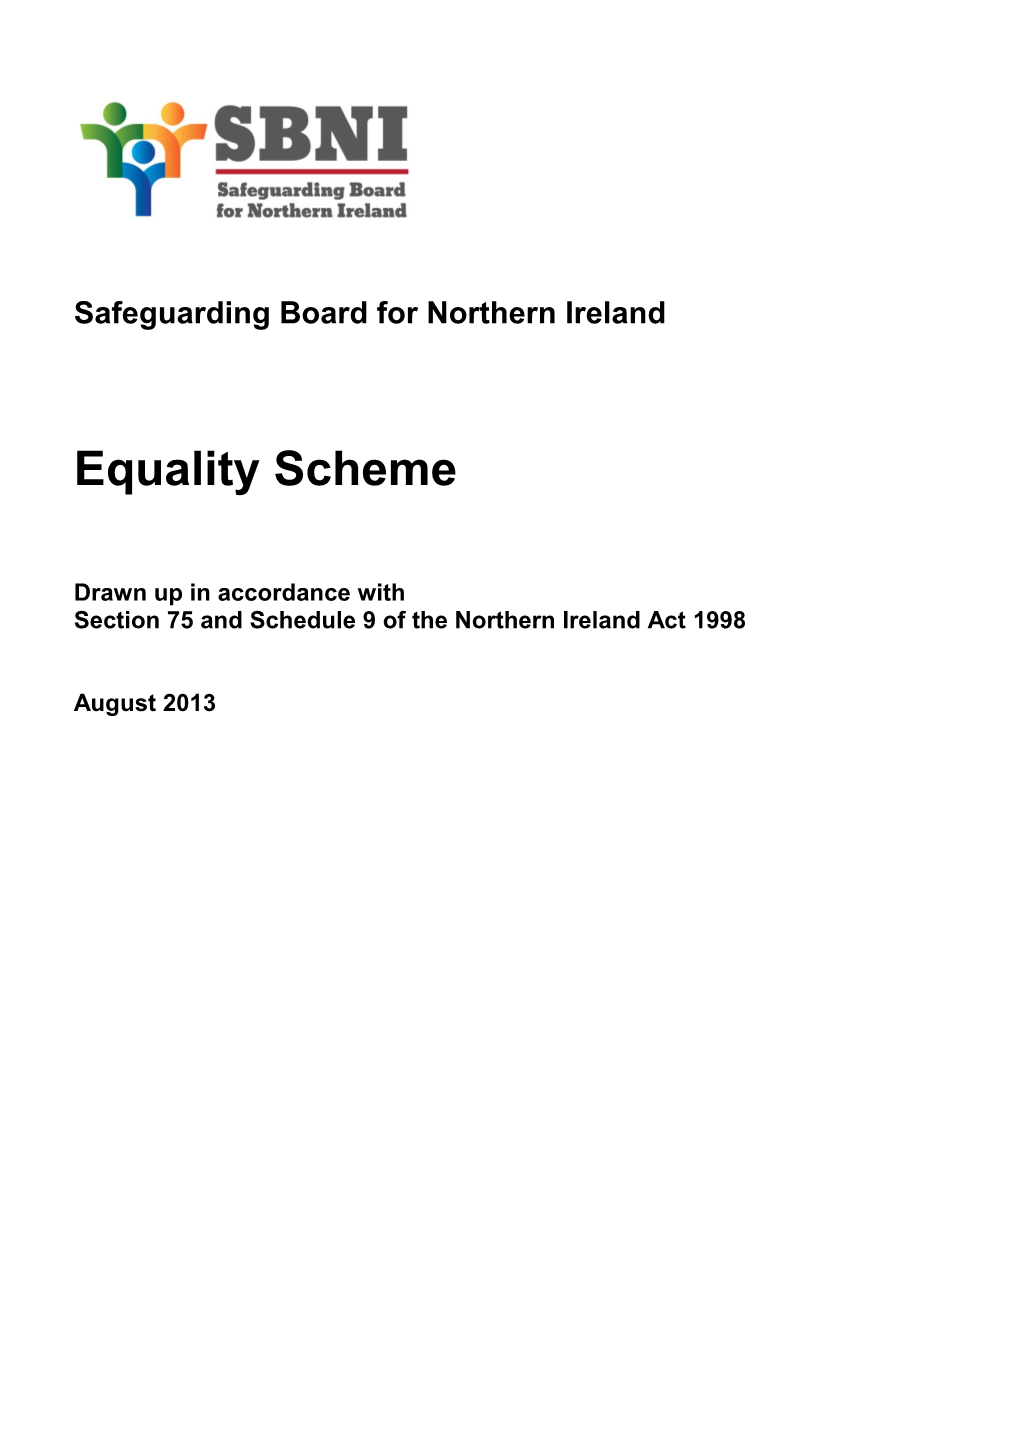 Section 75 of the Northern Ireland Act 1998 (The Act) Requires Public Authorities Designated s2